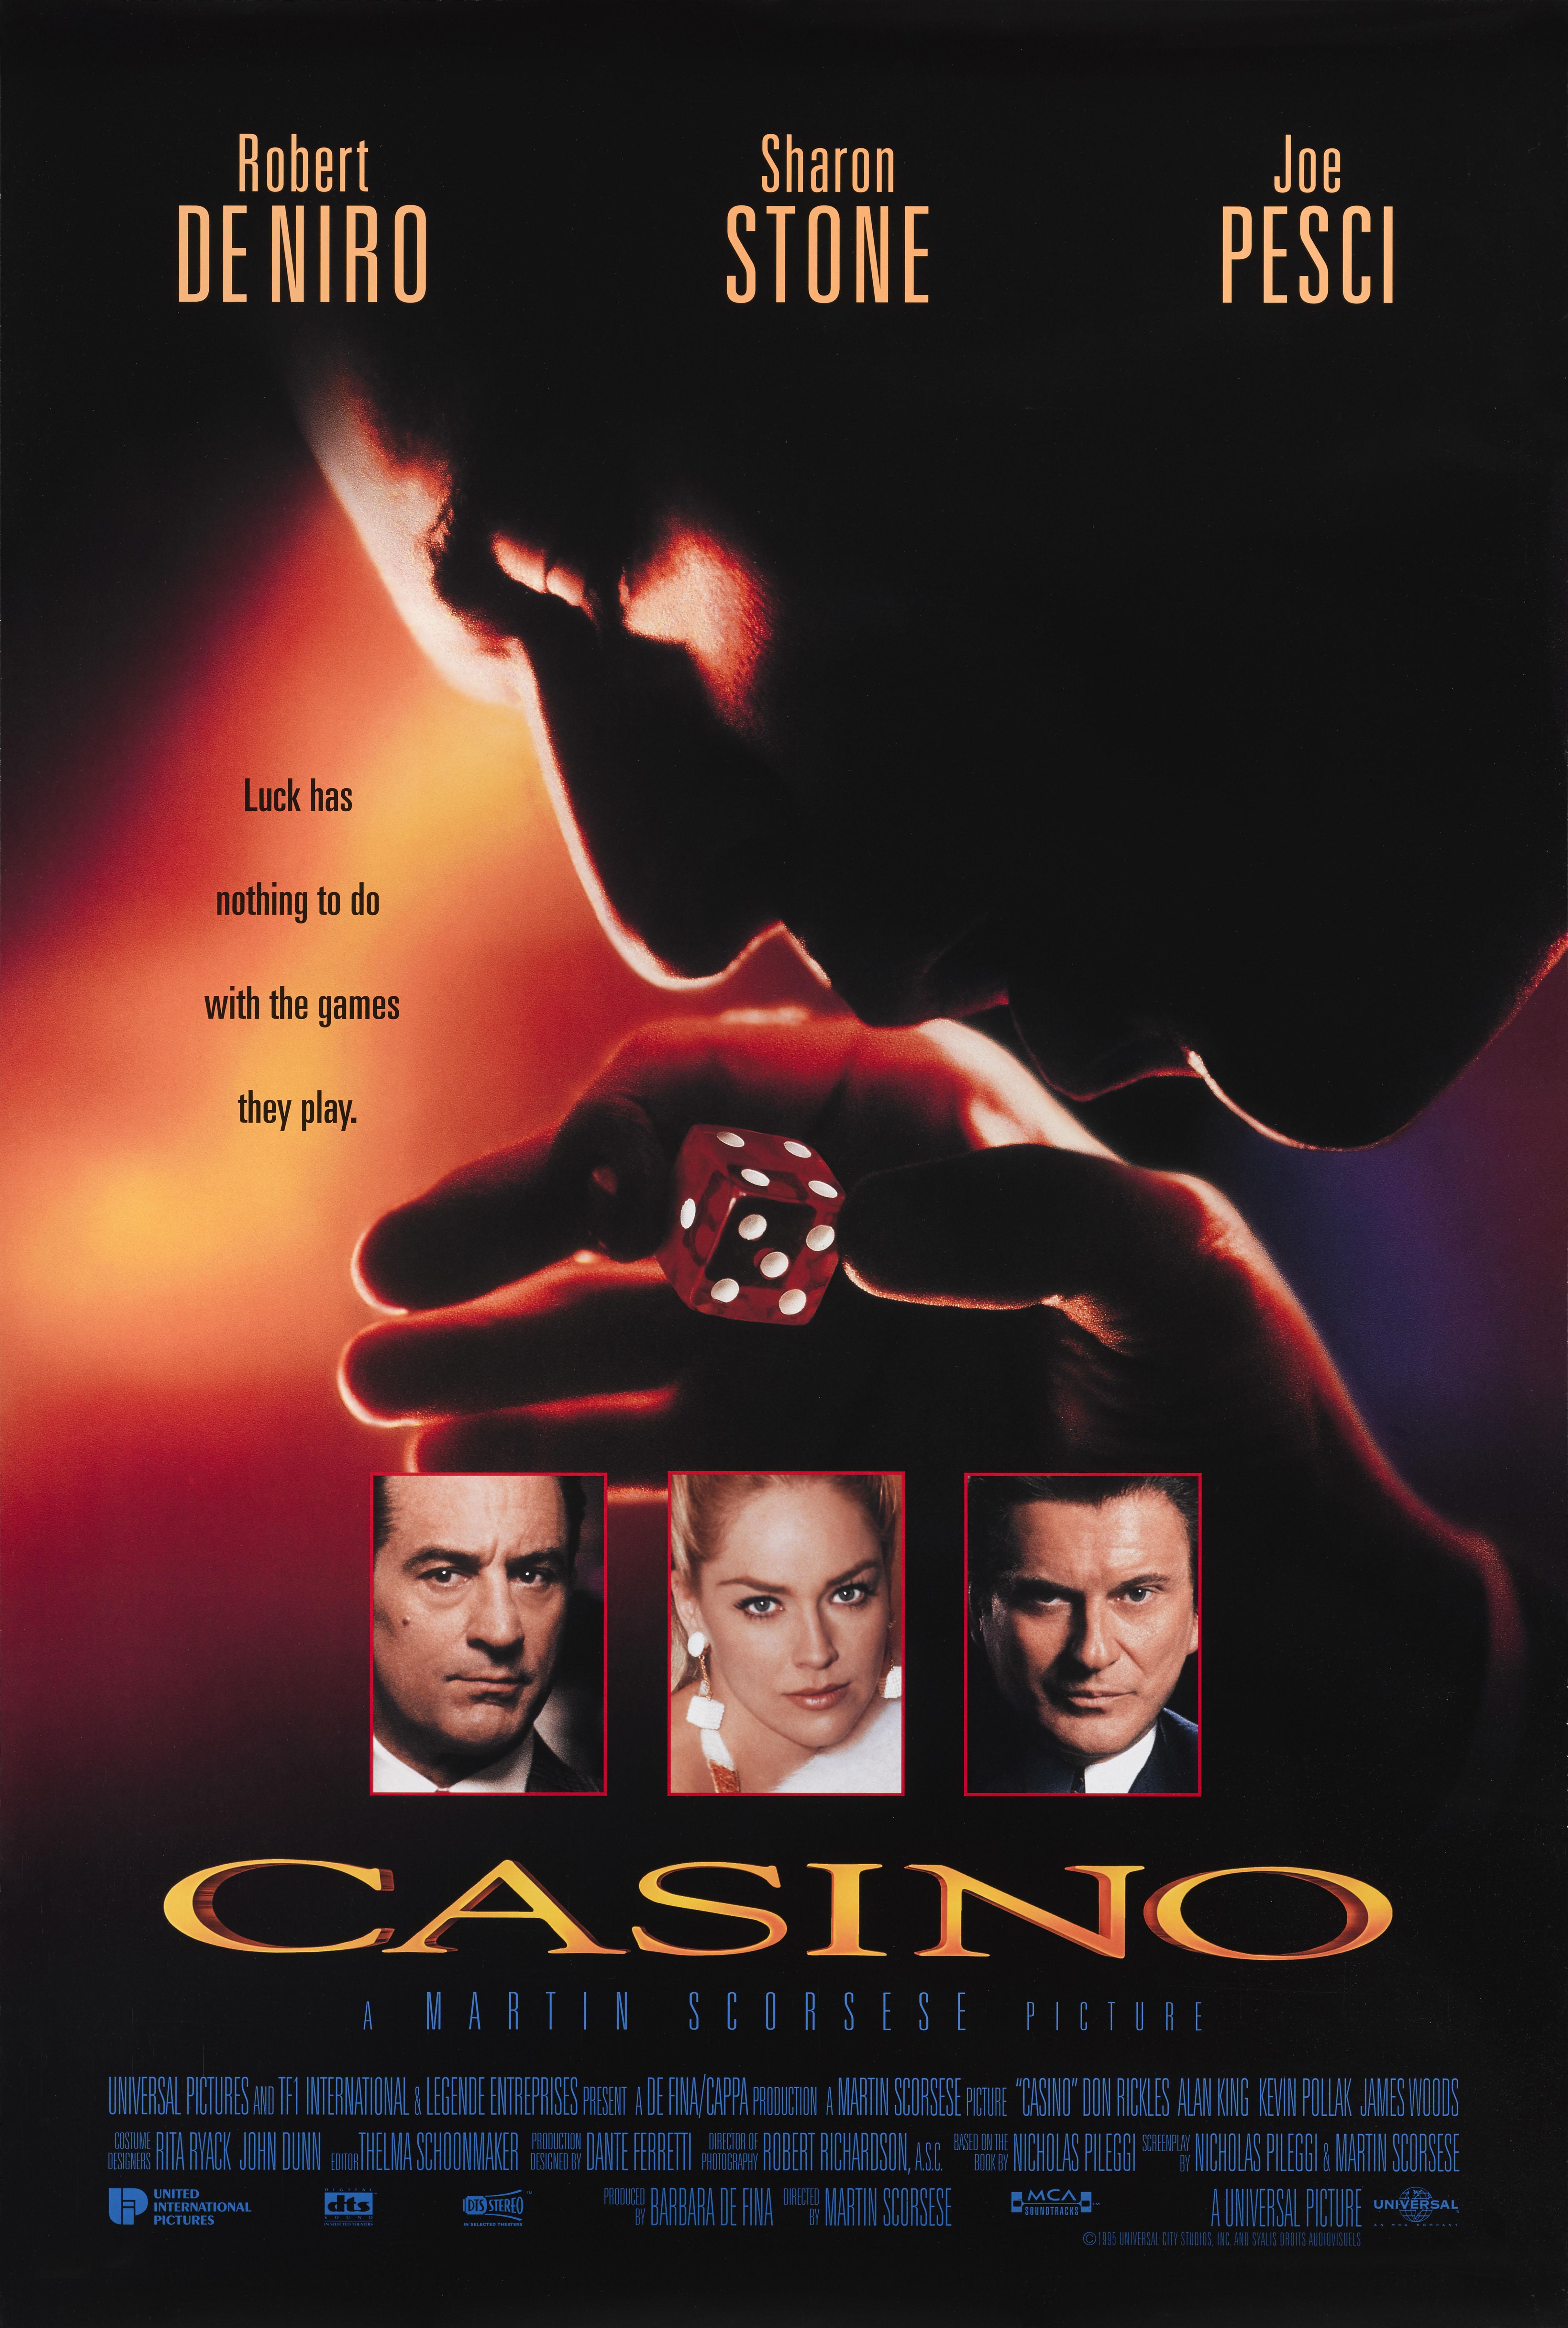 Original US film poster for Casino 1995.
This film was directed by Martin Scorsese and starred Robert De Niro, Sharon Stone, Joe Pesci and James Woods.
This poster is unfolded and would be shipped in a strong tube.